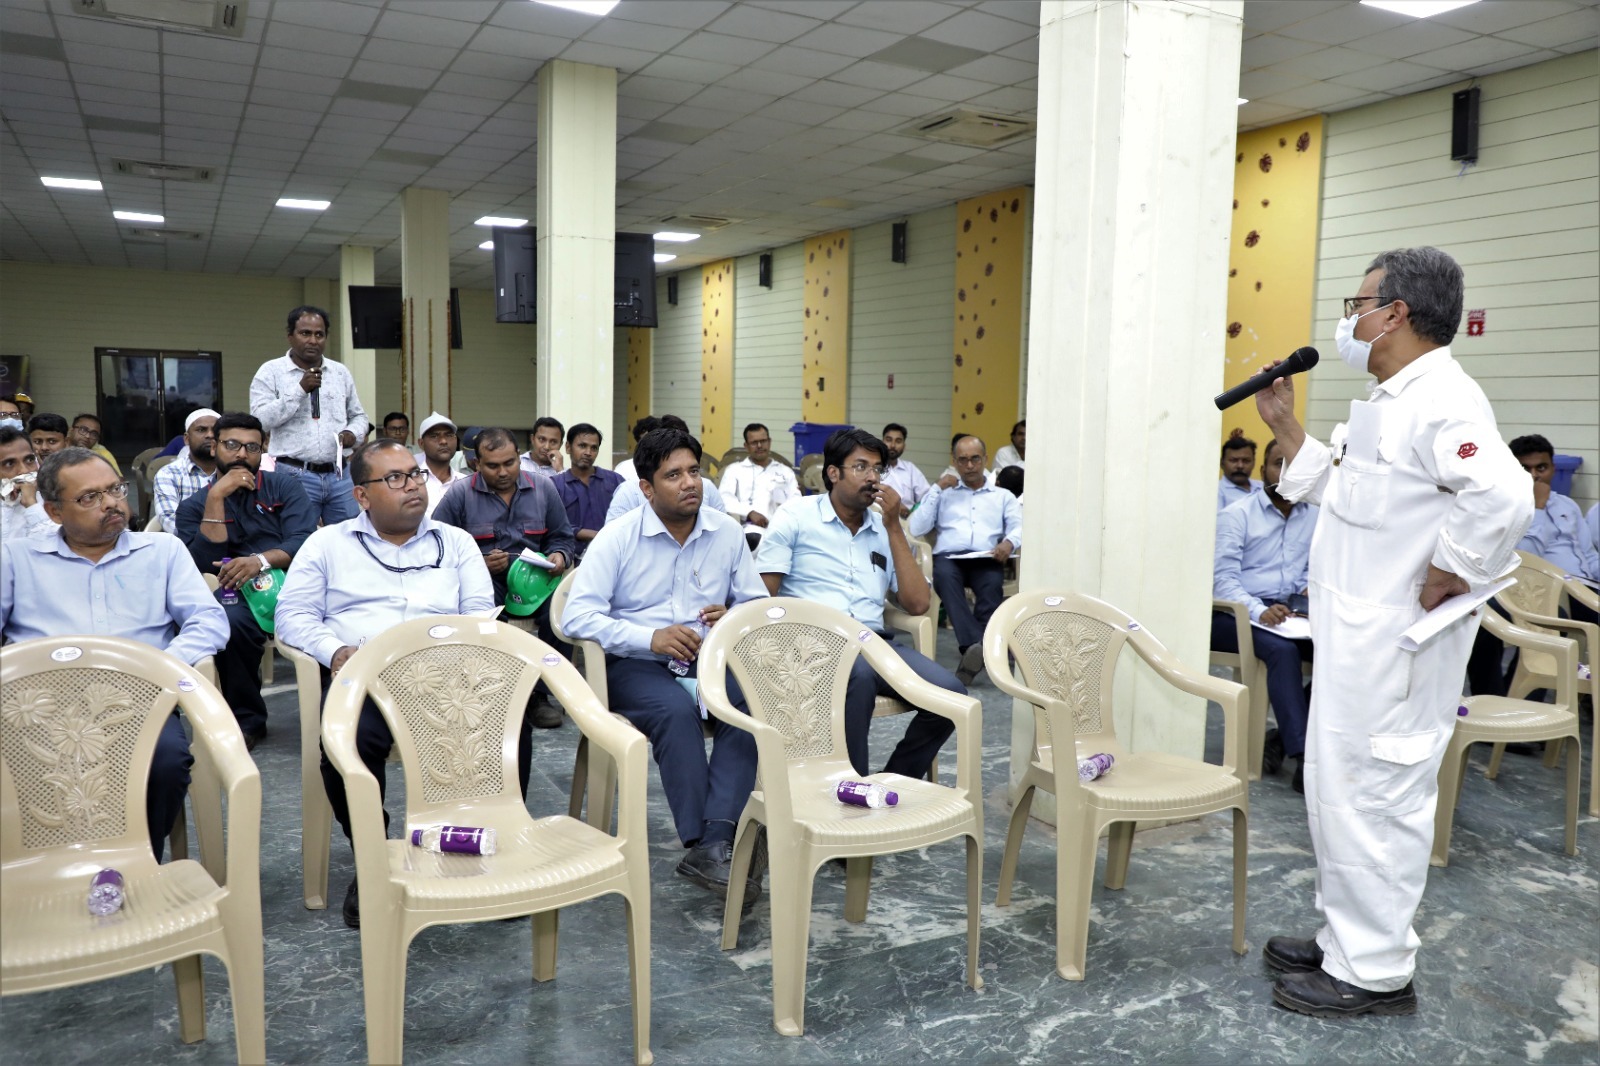 Safety Meeting with contractors regarding adoption of required Safety Norms during execution of job by the Working Personnel at GRSE Main Unit on 05 May 23